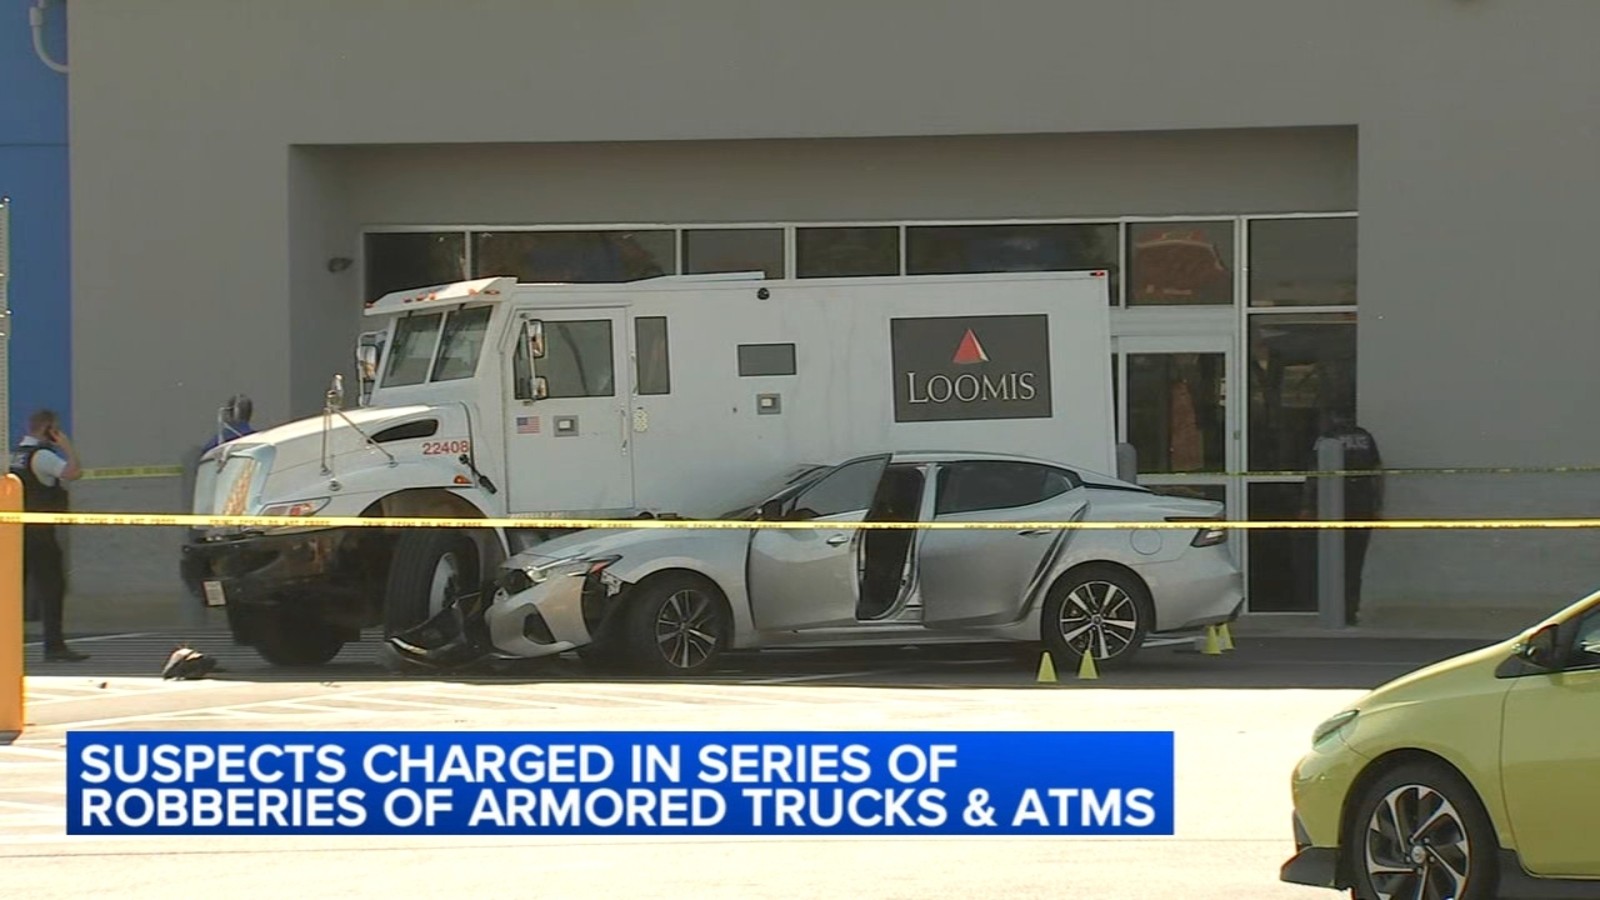 10 men charged in connection to armored truck, ATM robberies in Chicago suburbs, FBI says